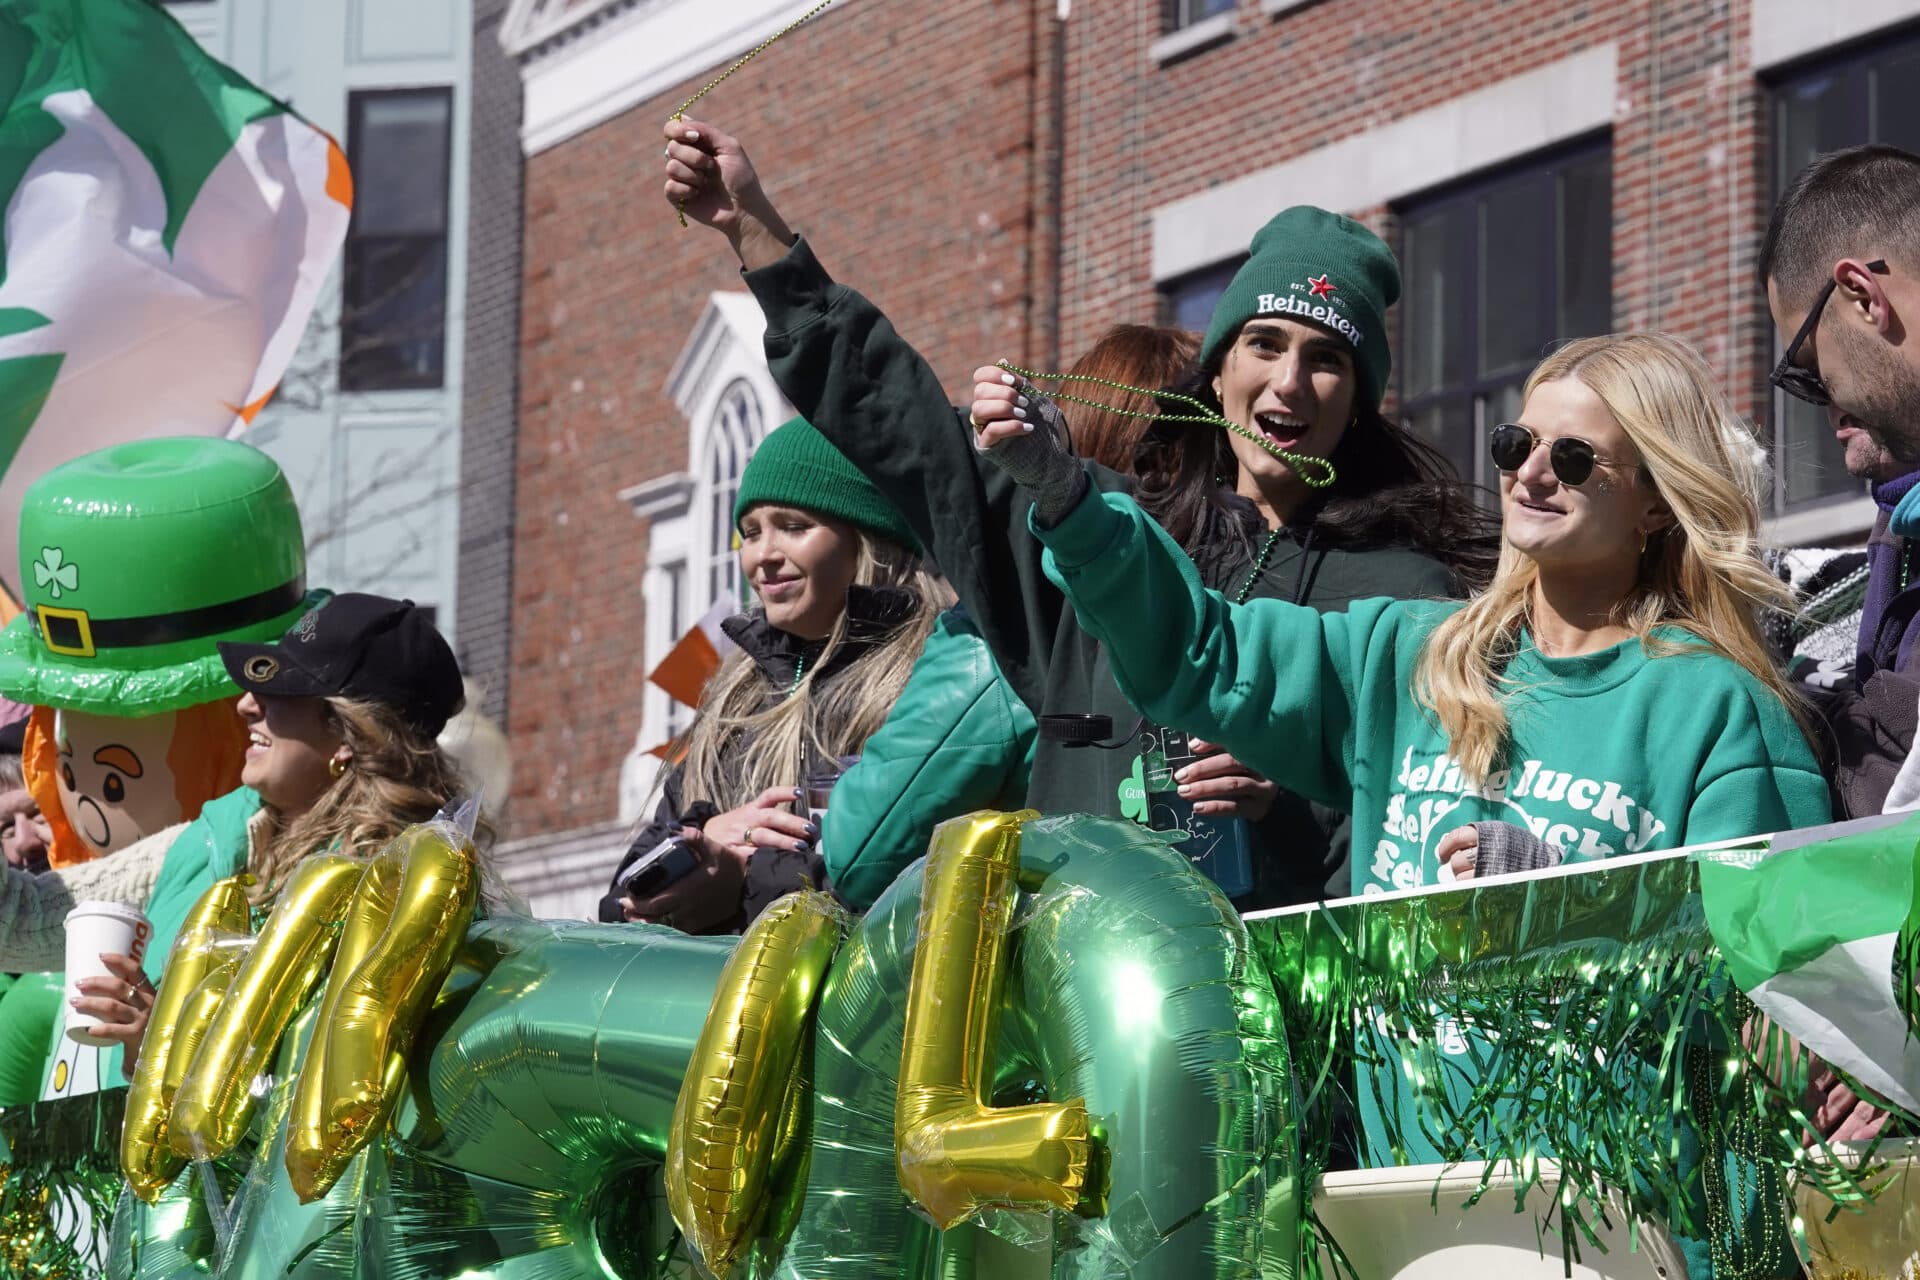 People celebrate while riding on a float during the St. Patrick's Day parade. (Steven Senne/AP)